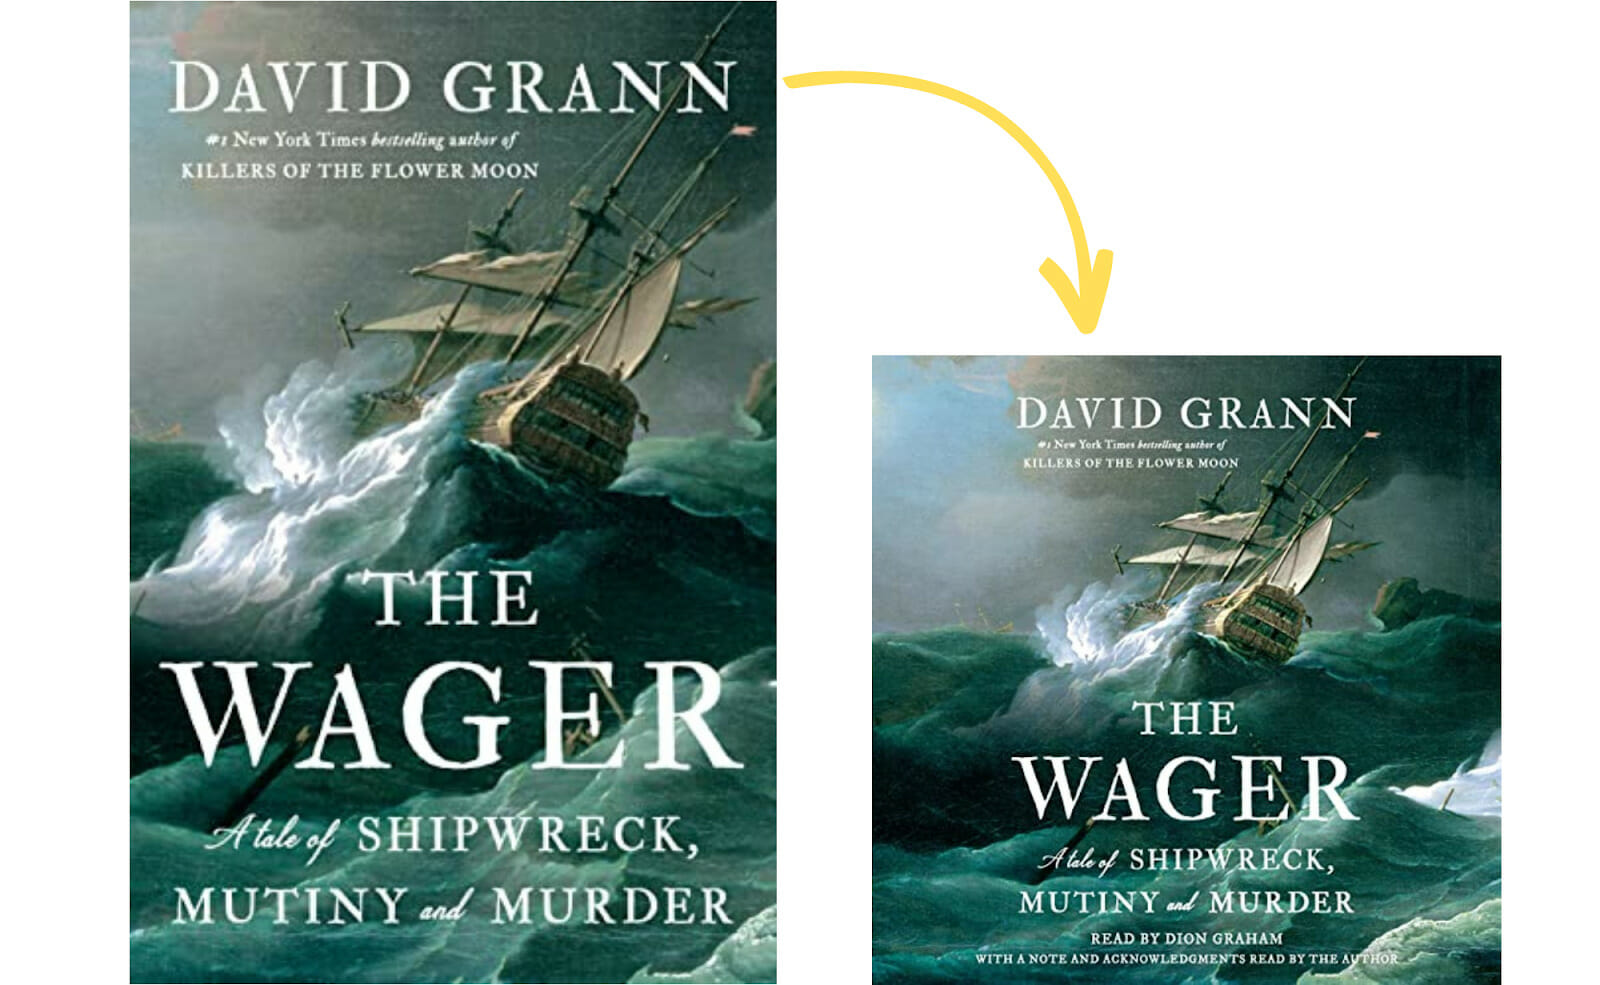 Designing audiobook covers featuring The Wager by David Grann